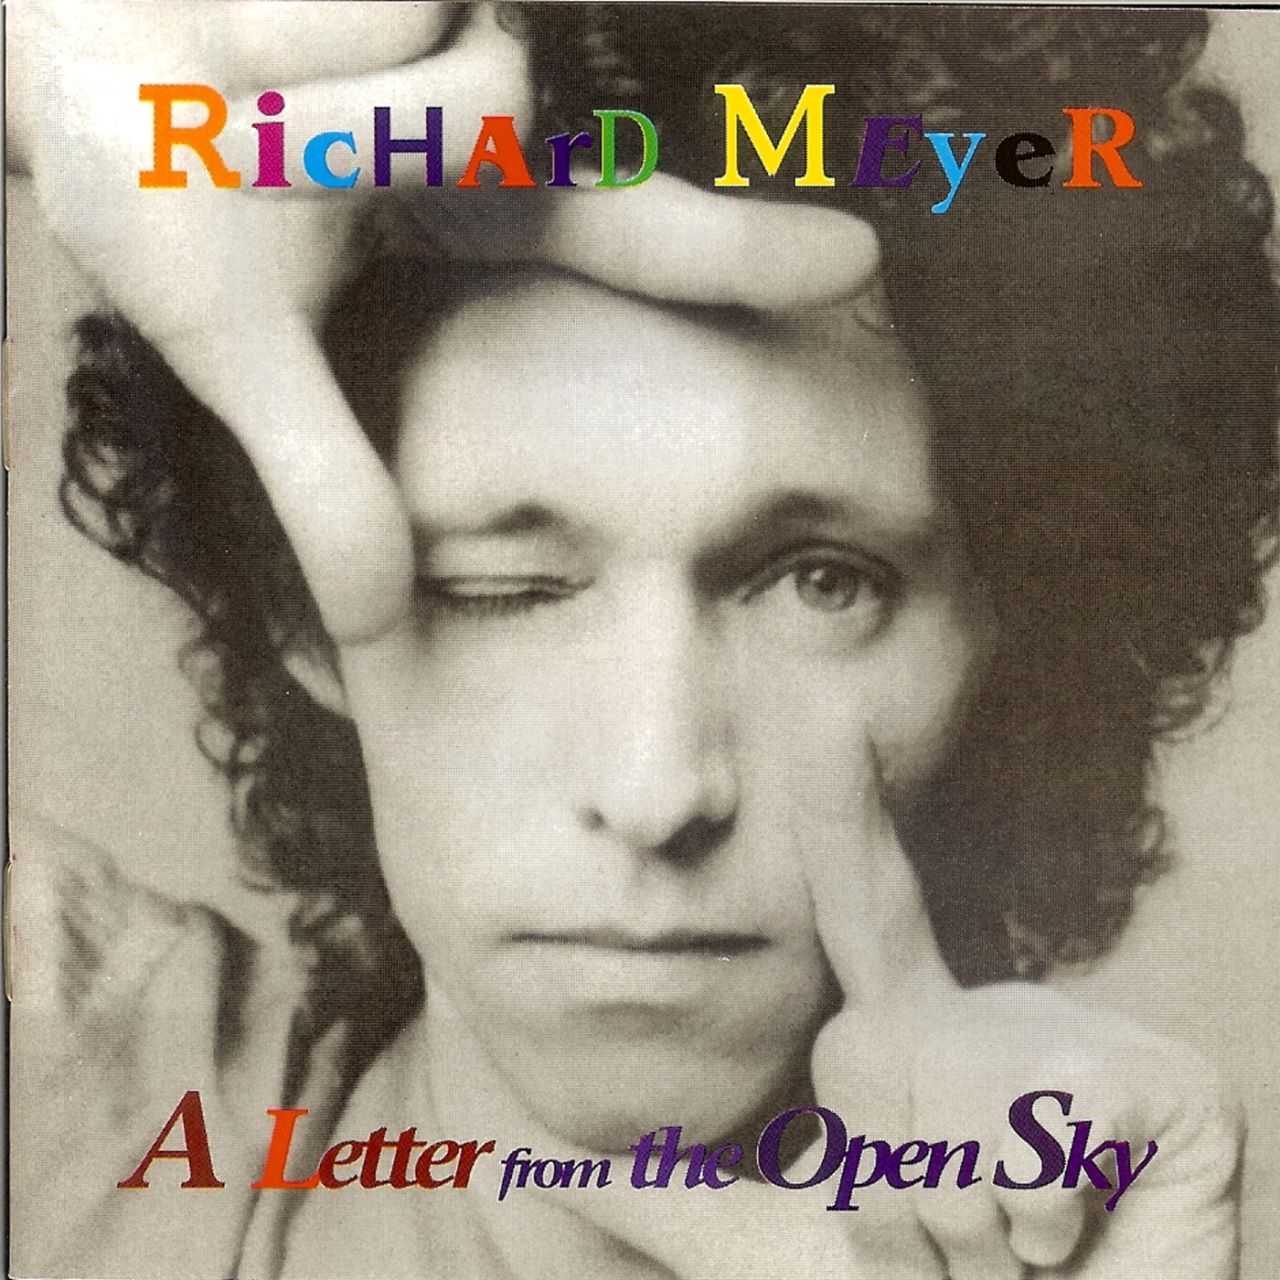 Richard Meyer - A Letter From The Open Sky cover album